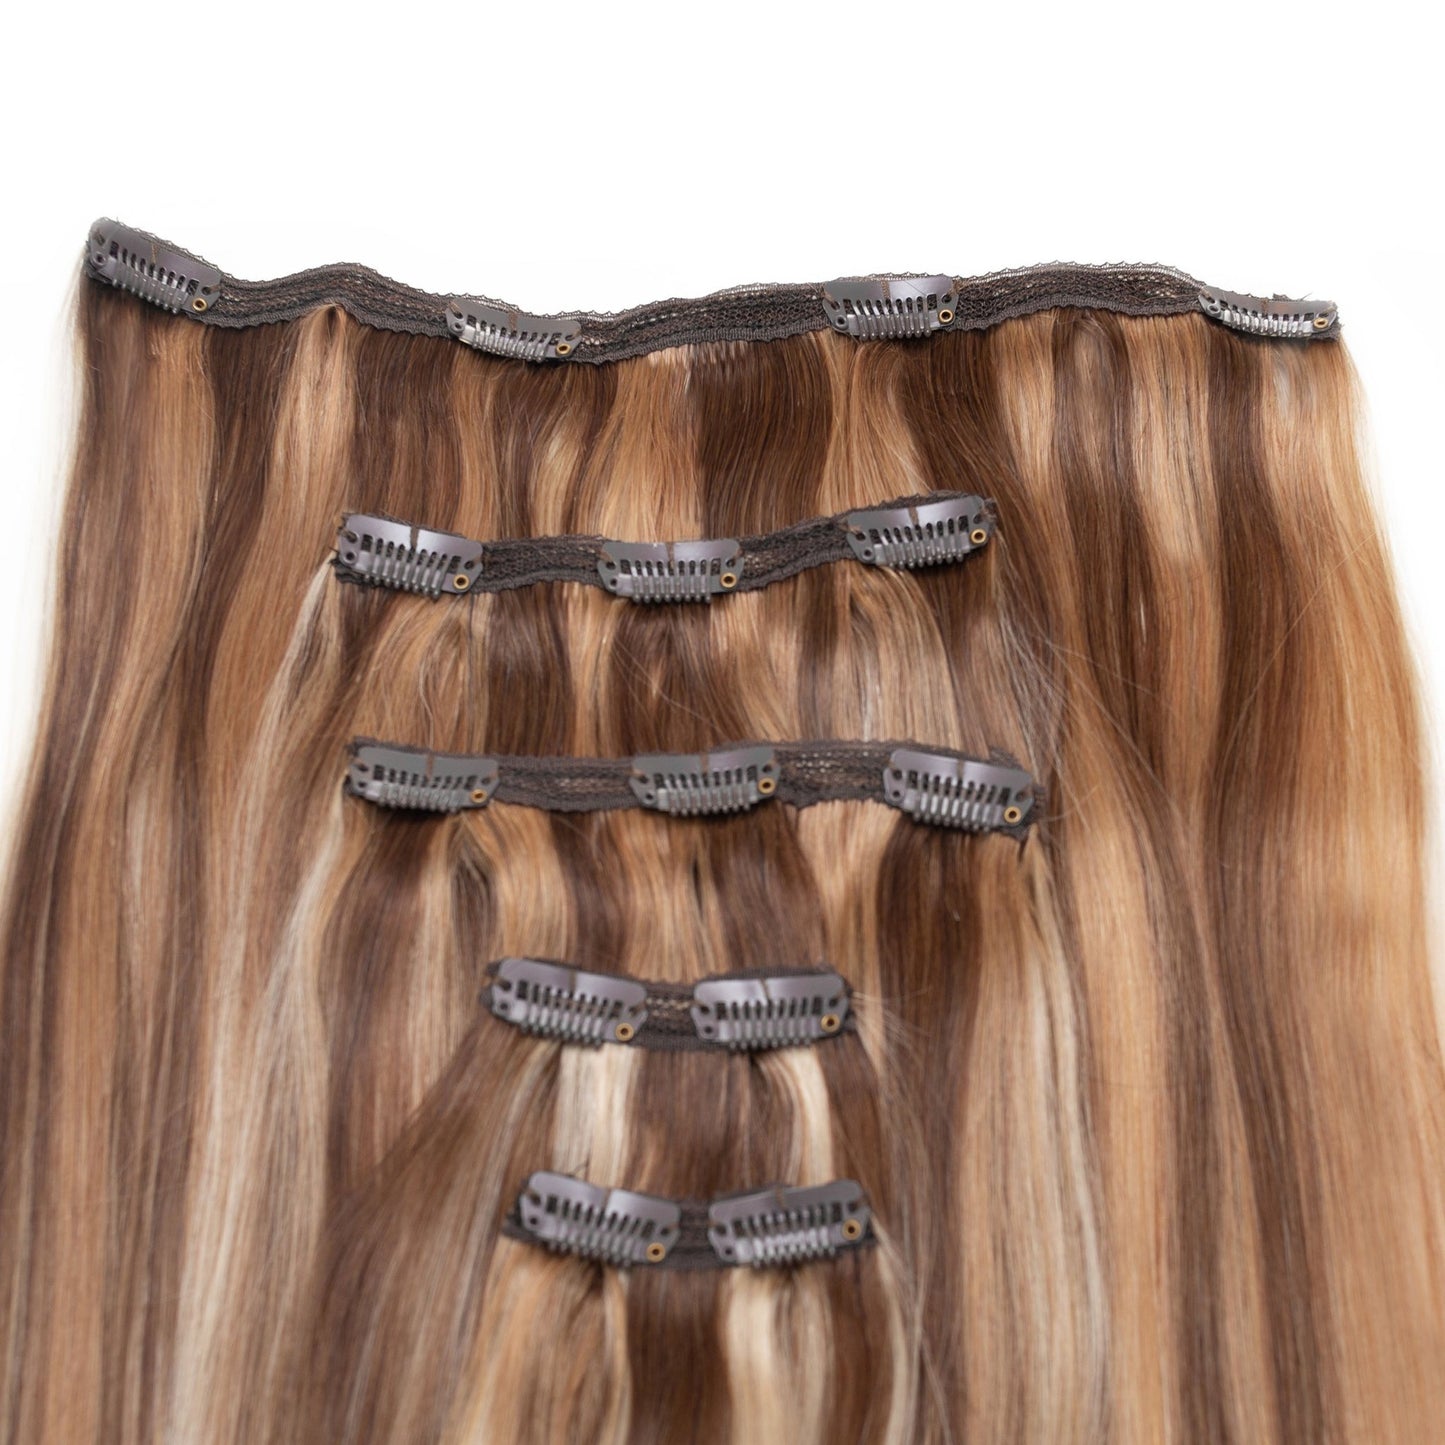 Seamless1 Midnight Human Hair in 5 Piece - shelley and co